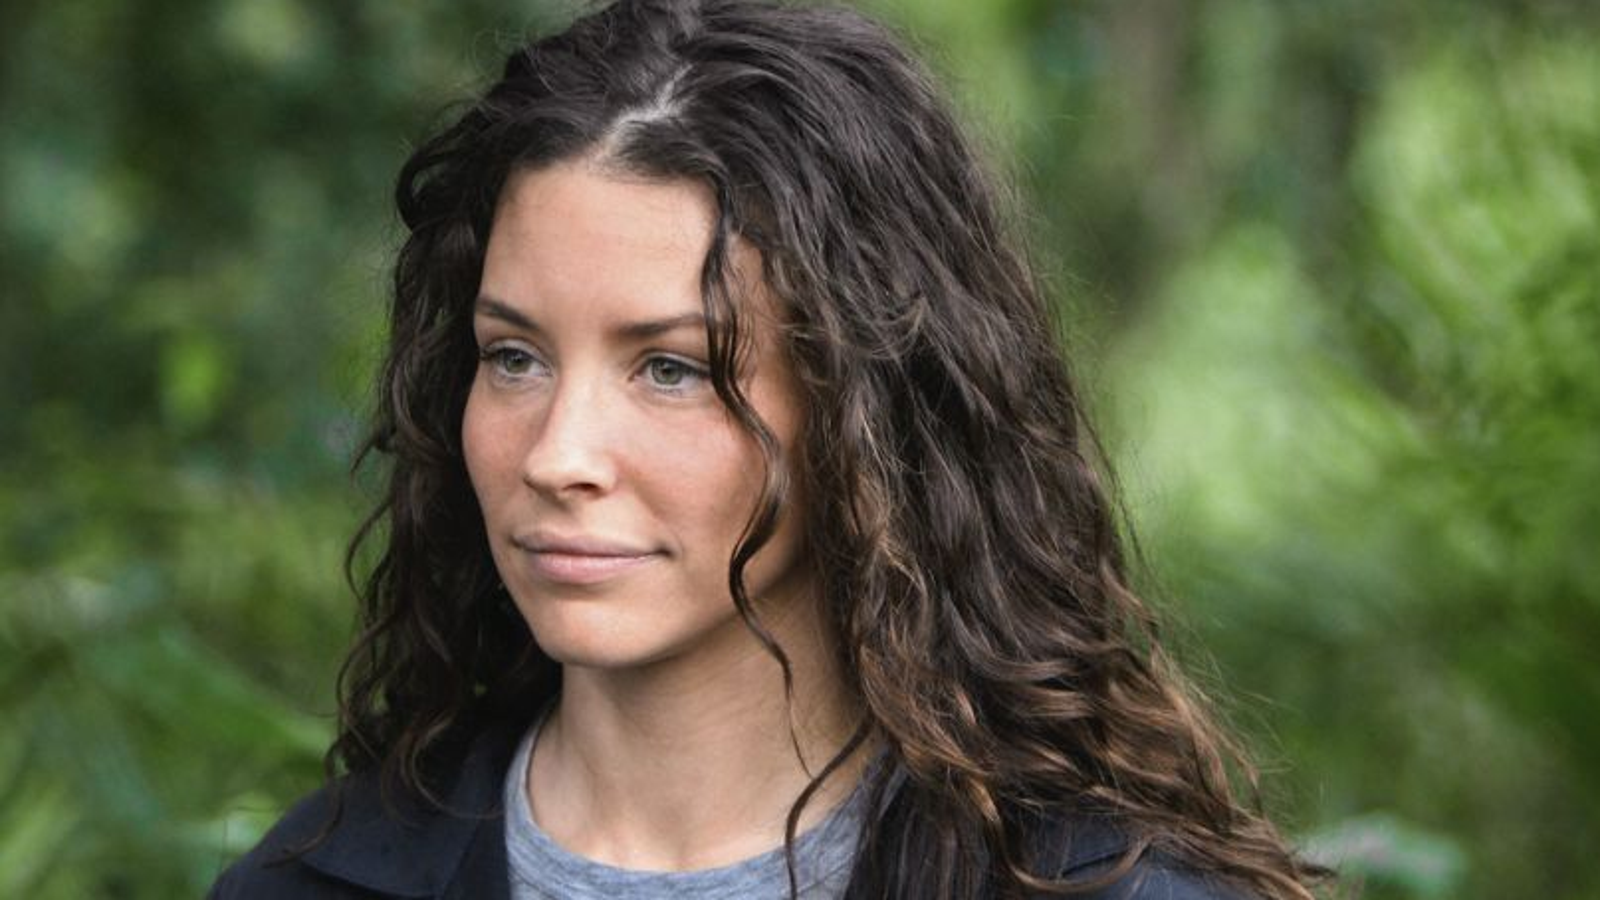 The Producers Of Lost Have Apologized To Evangeline Lilly For Cornered Nude Scenes